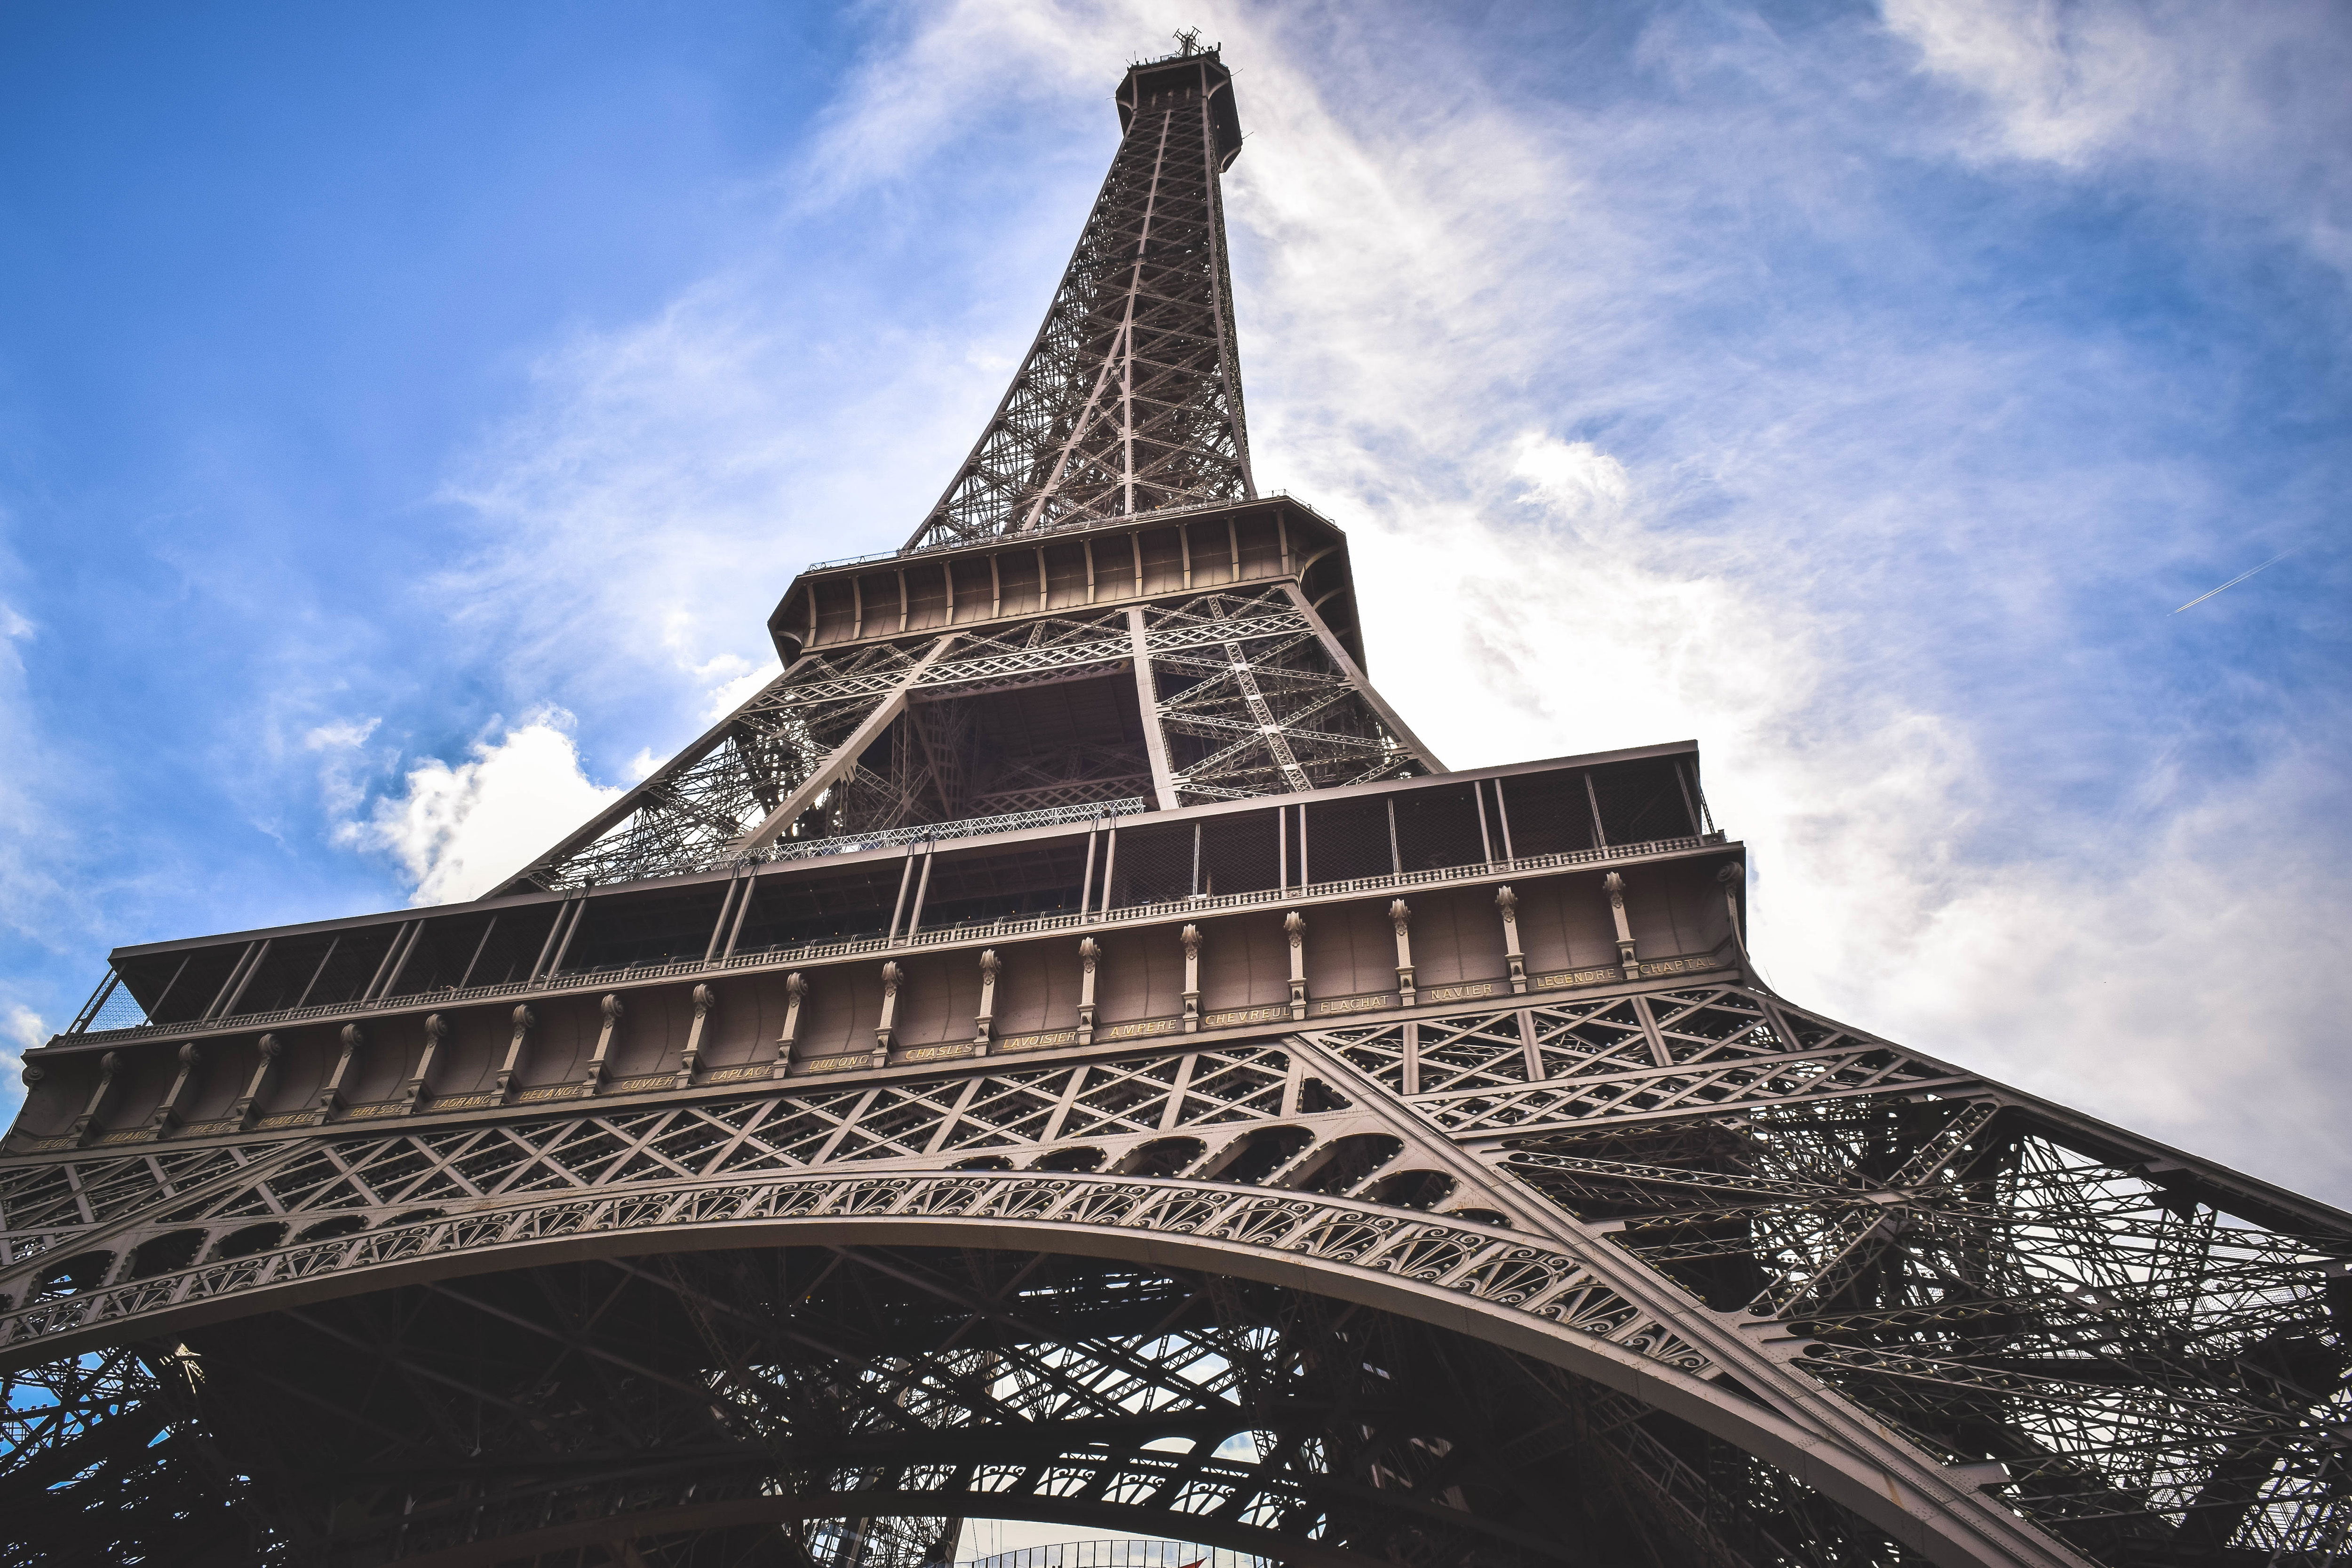 Download Eiffel Tower Royalty Free Stock Photo and Image